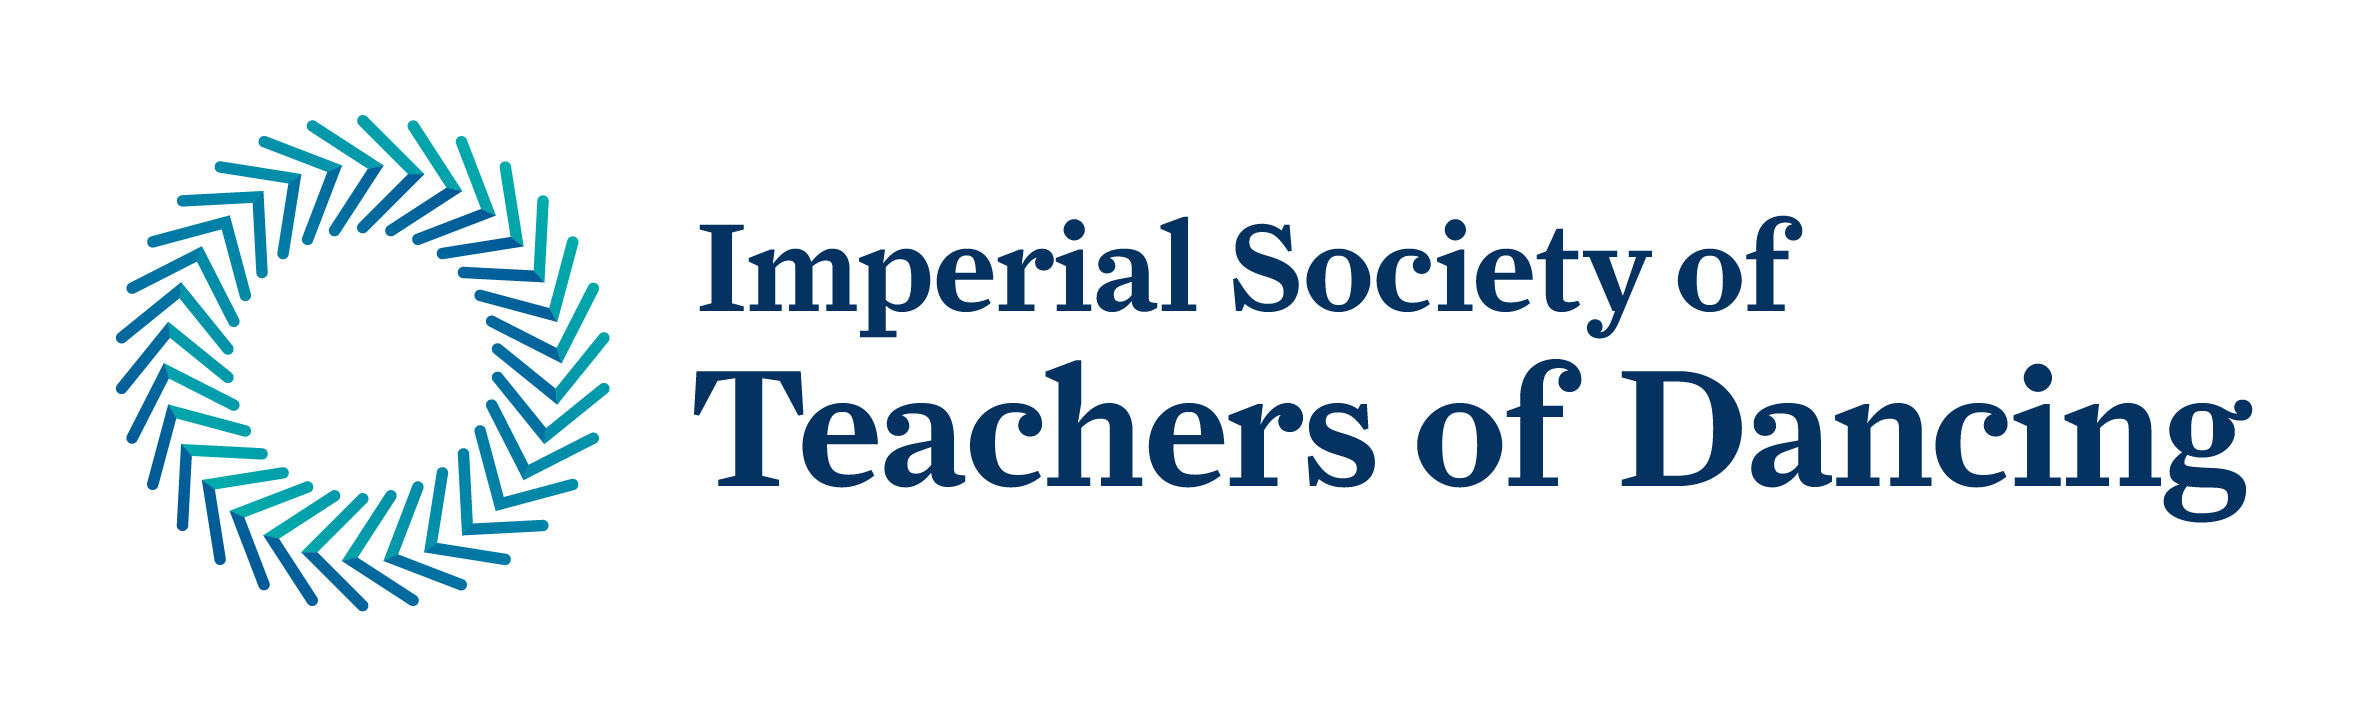 ISTD - Imperial Society of Teachers of Dancing